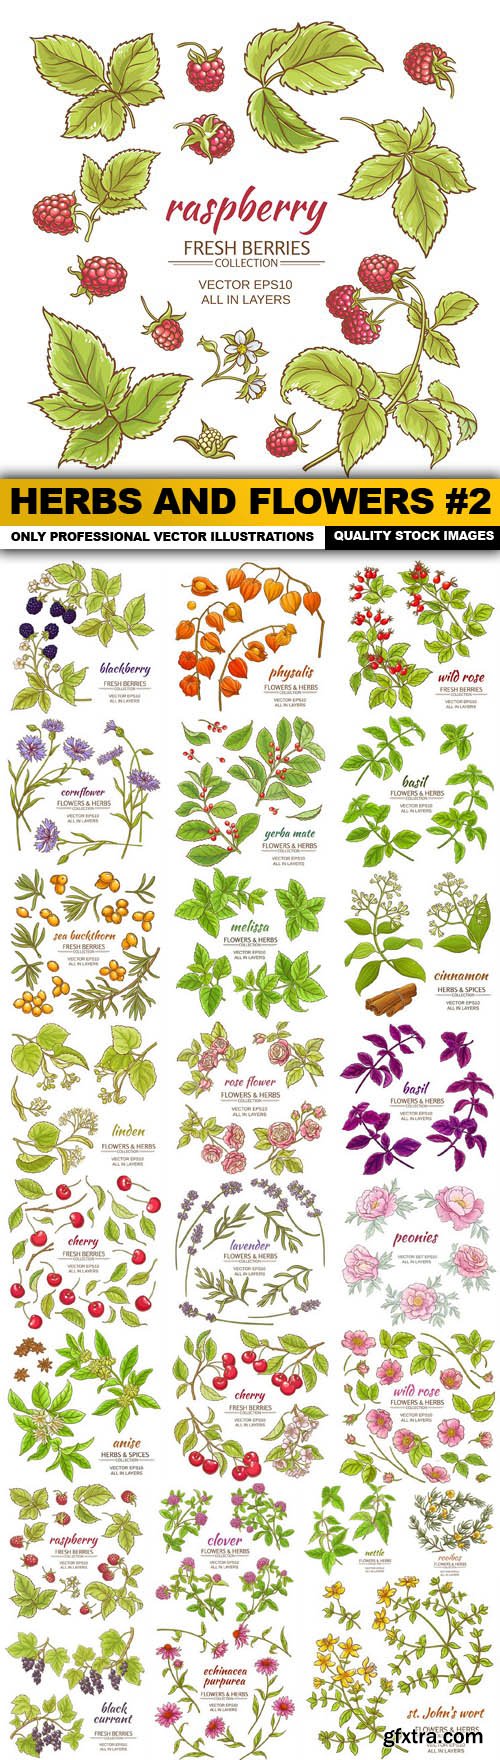 Herbs And Flowers #2 - 25 Vector